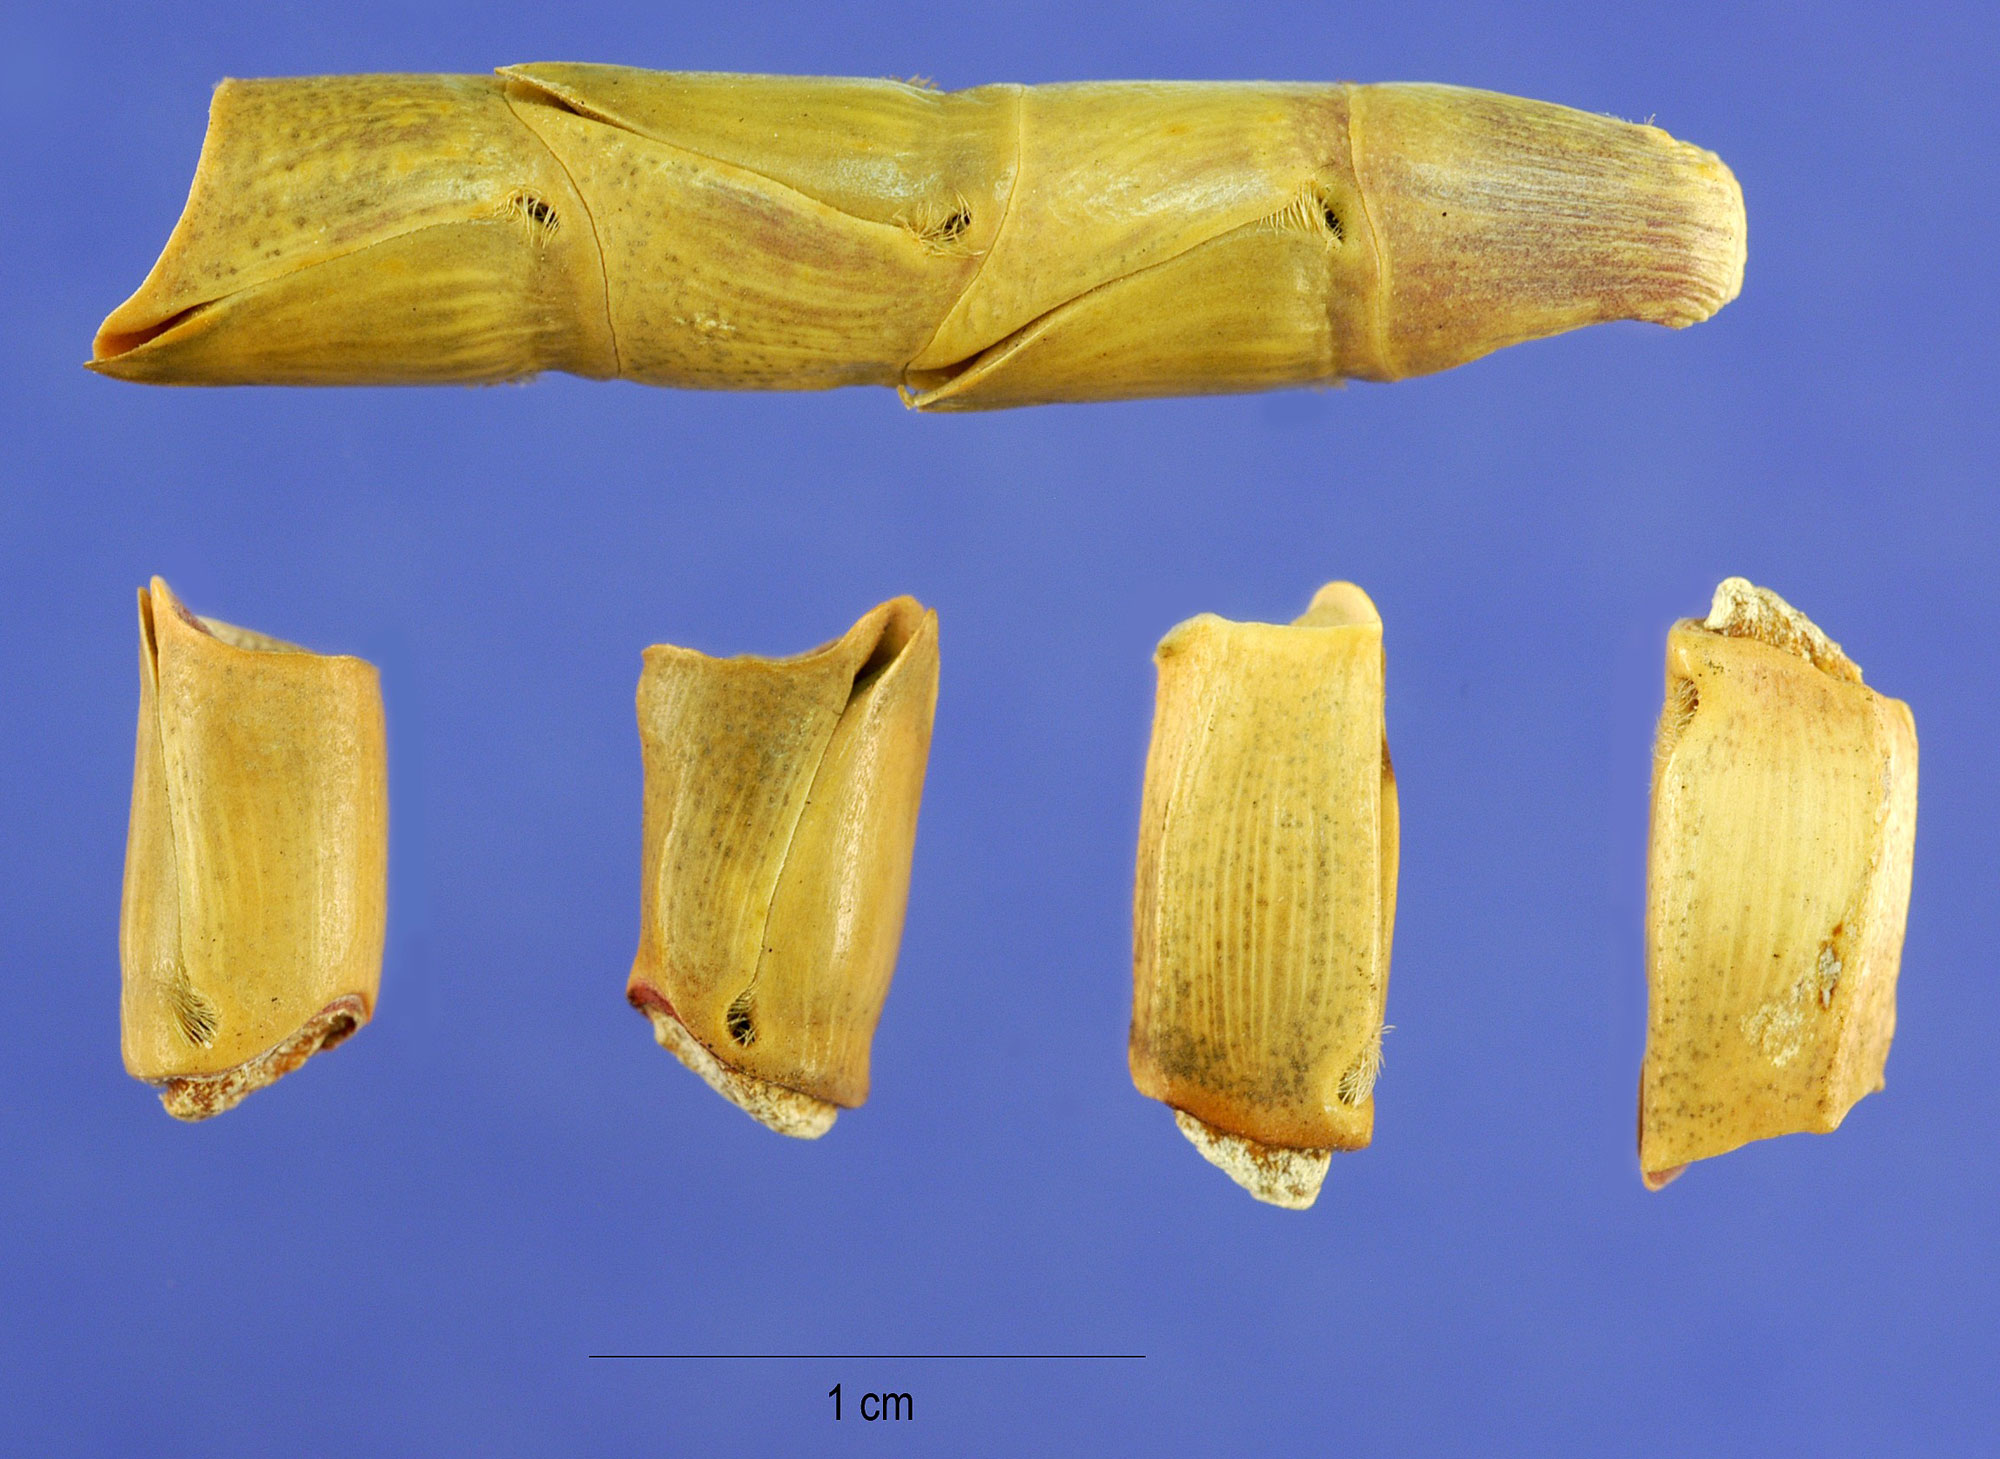 Photograph of a portion of a rame of eastern gamagrass. A segment of the rame near the two of the image shows four fruitcases (mature female spikelets) attached to one another. Four separated fruitcases are shown near the bottom of the image.